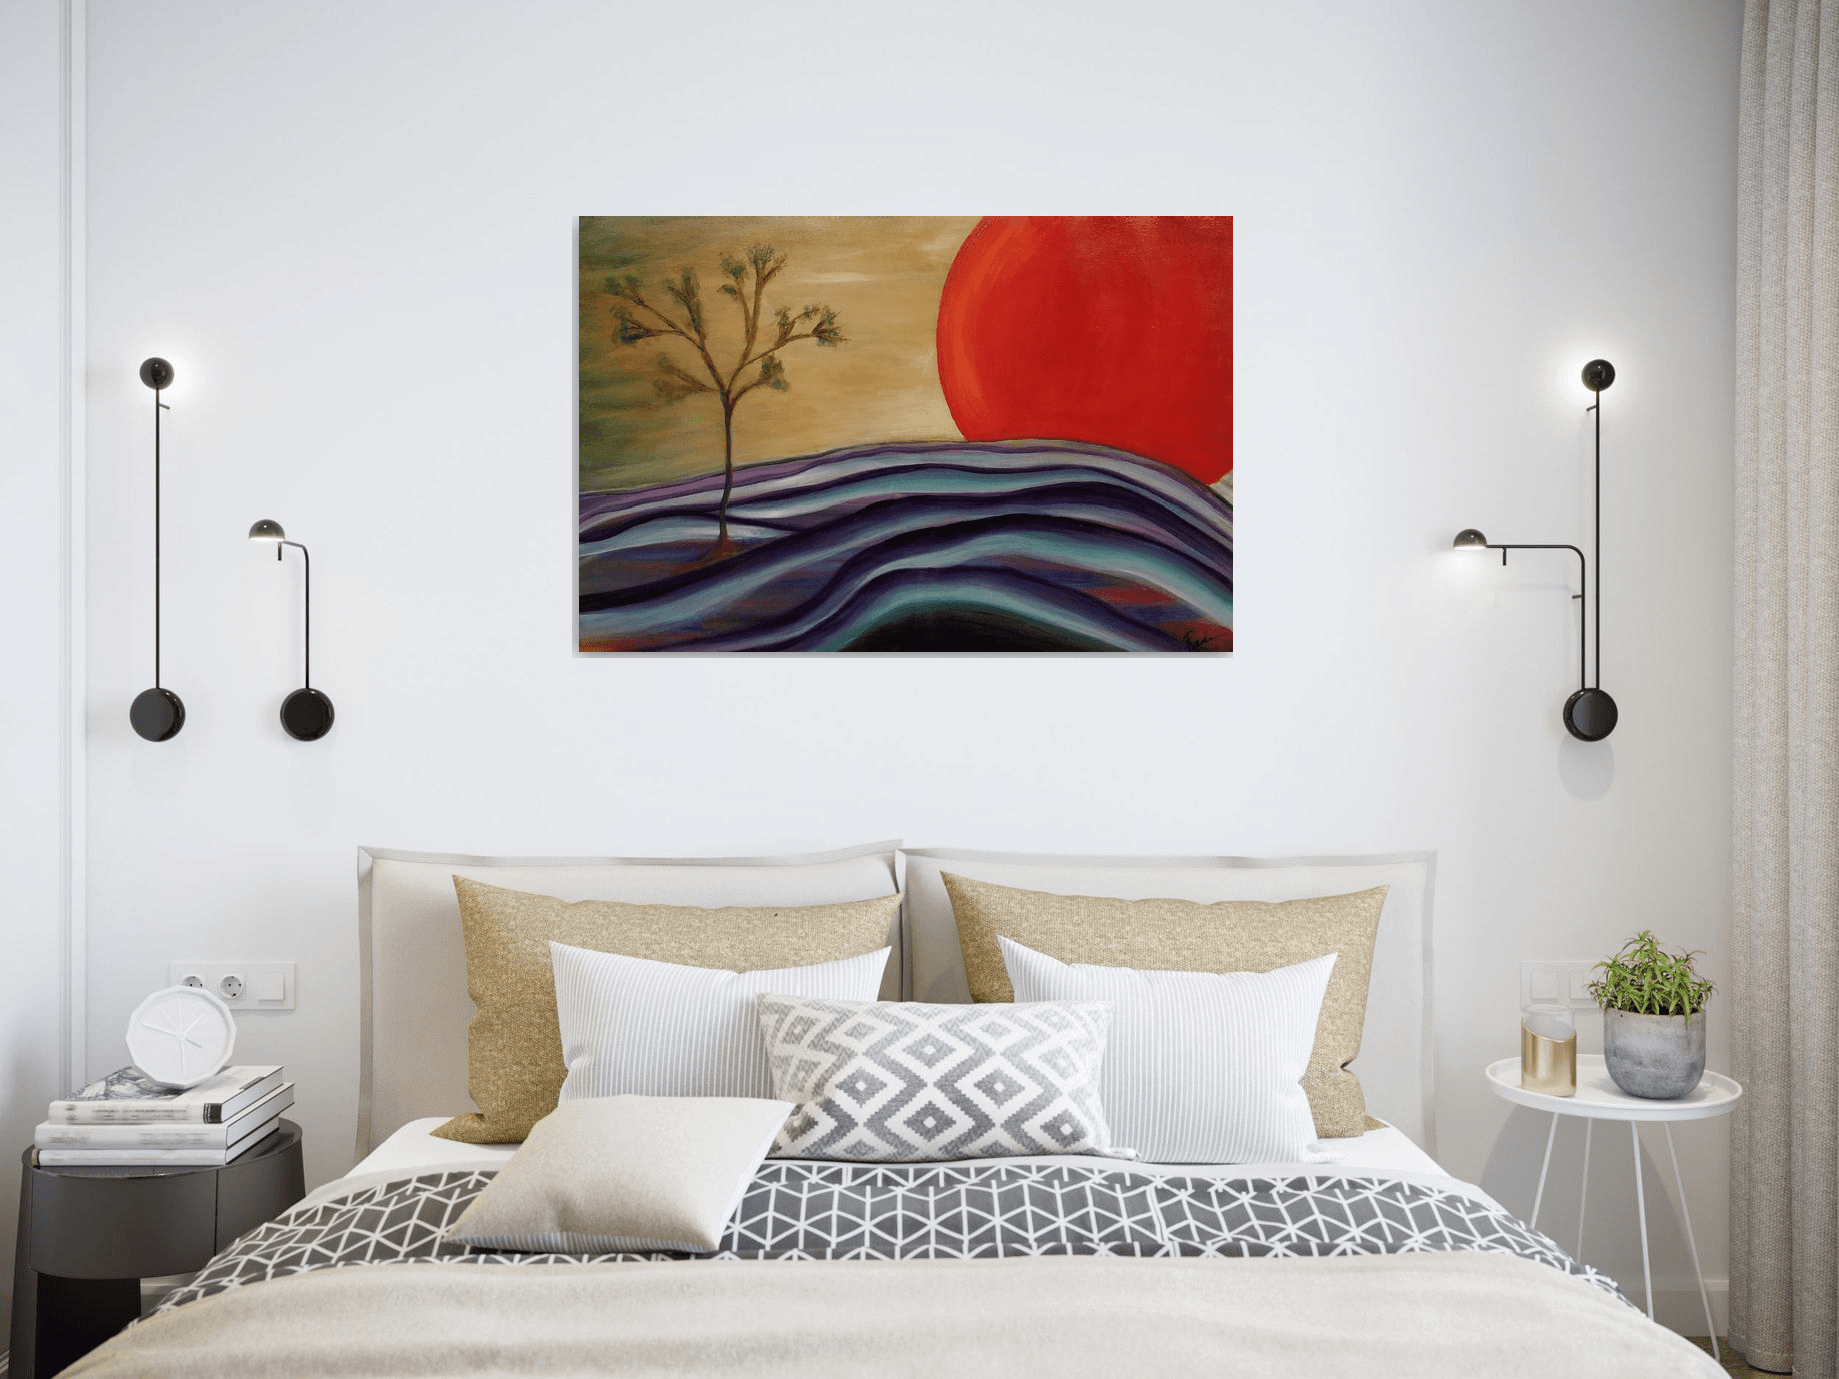 "Red Circle in Joshua Tree" - original landscape painting, 24in x 36in